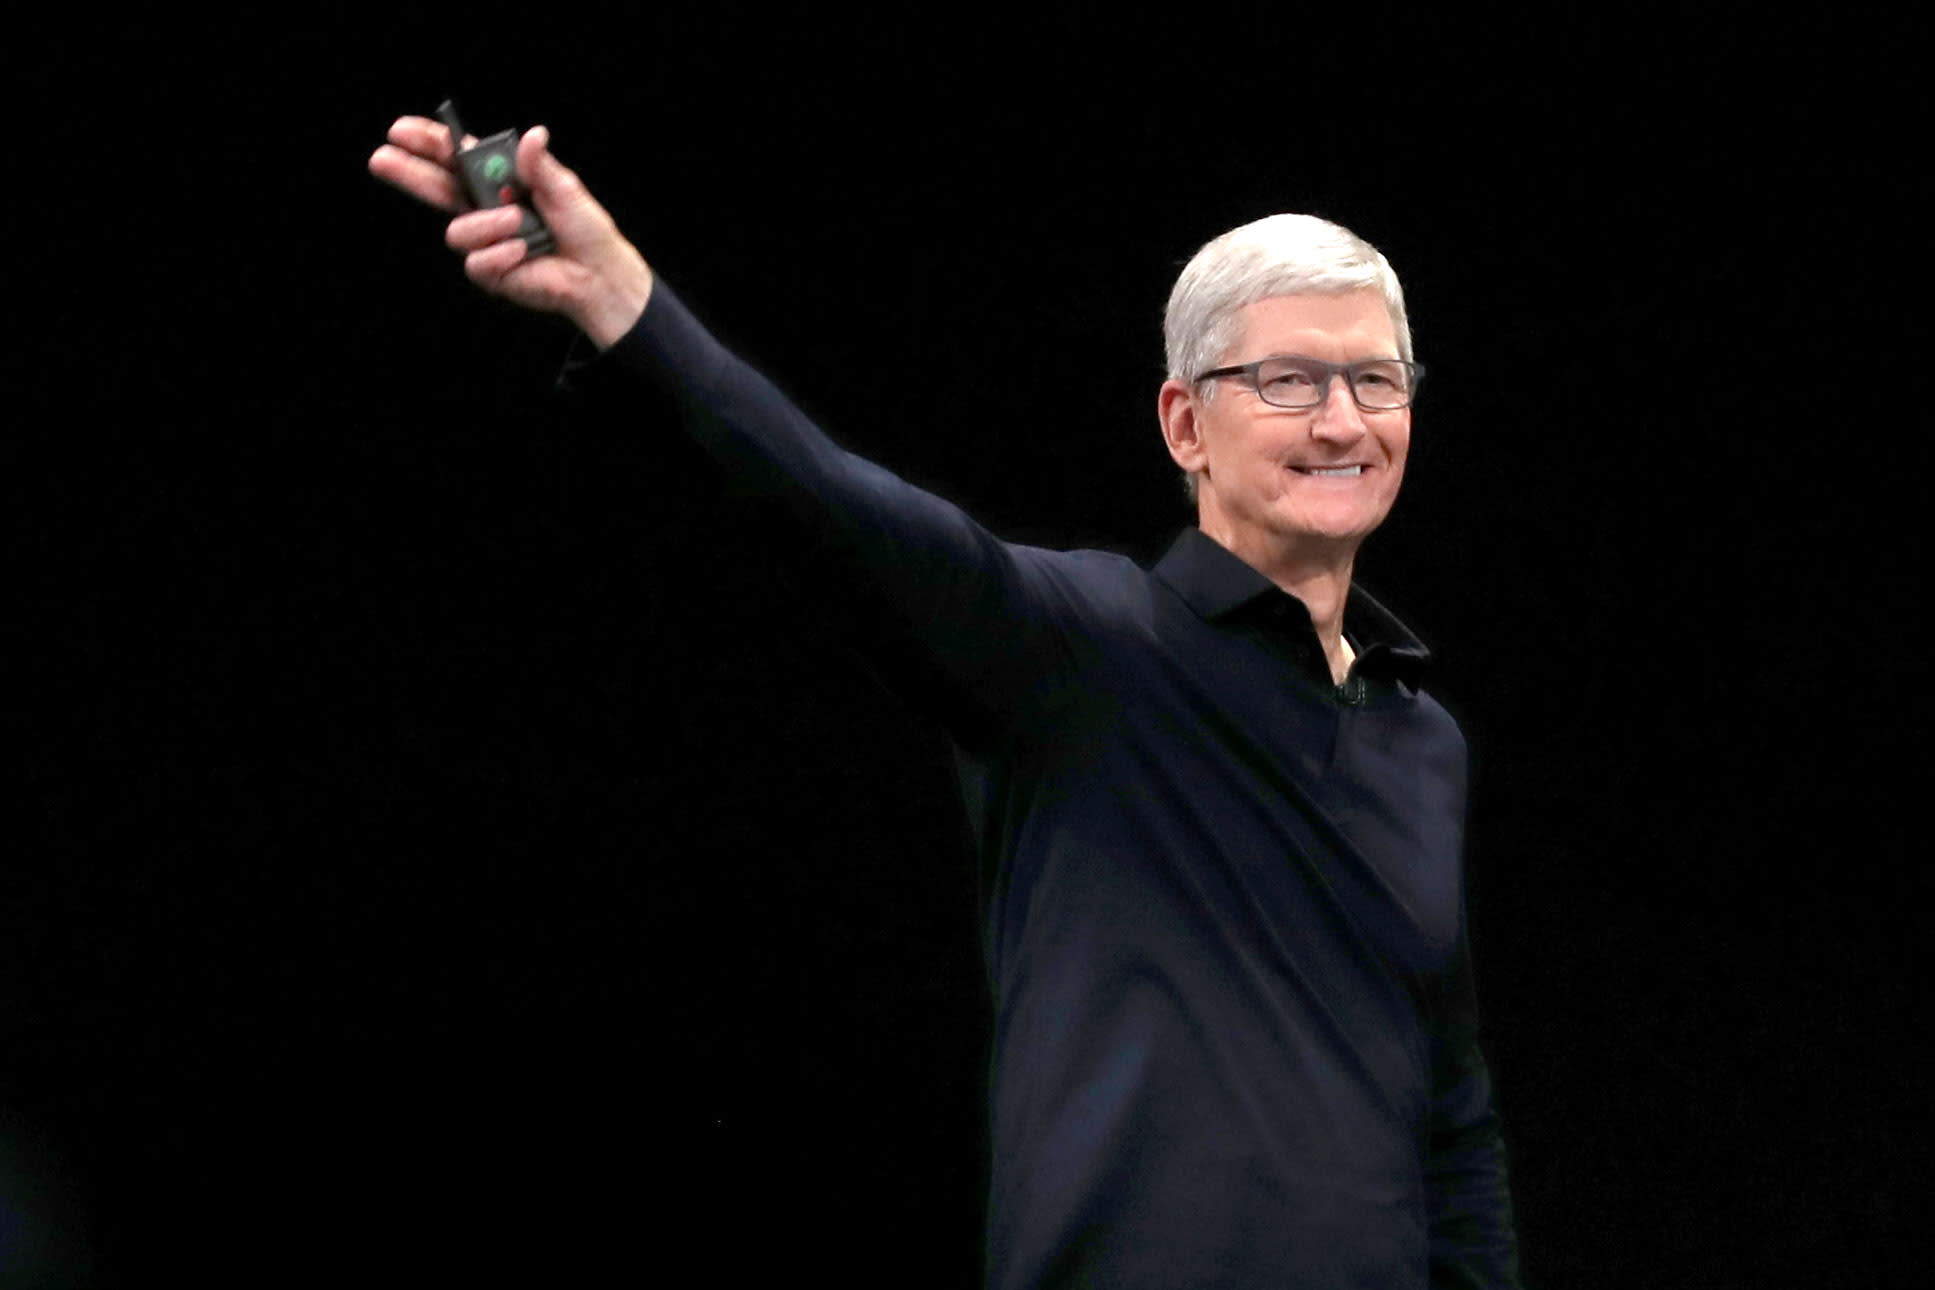 Apple is spending more than ever on R&D to fulfill the 'Tim Cook doctrine'